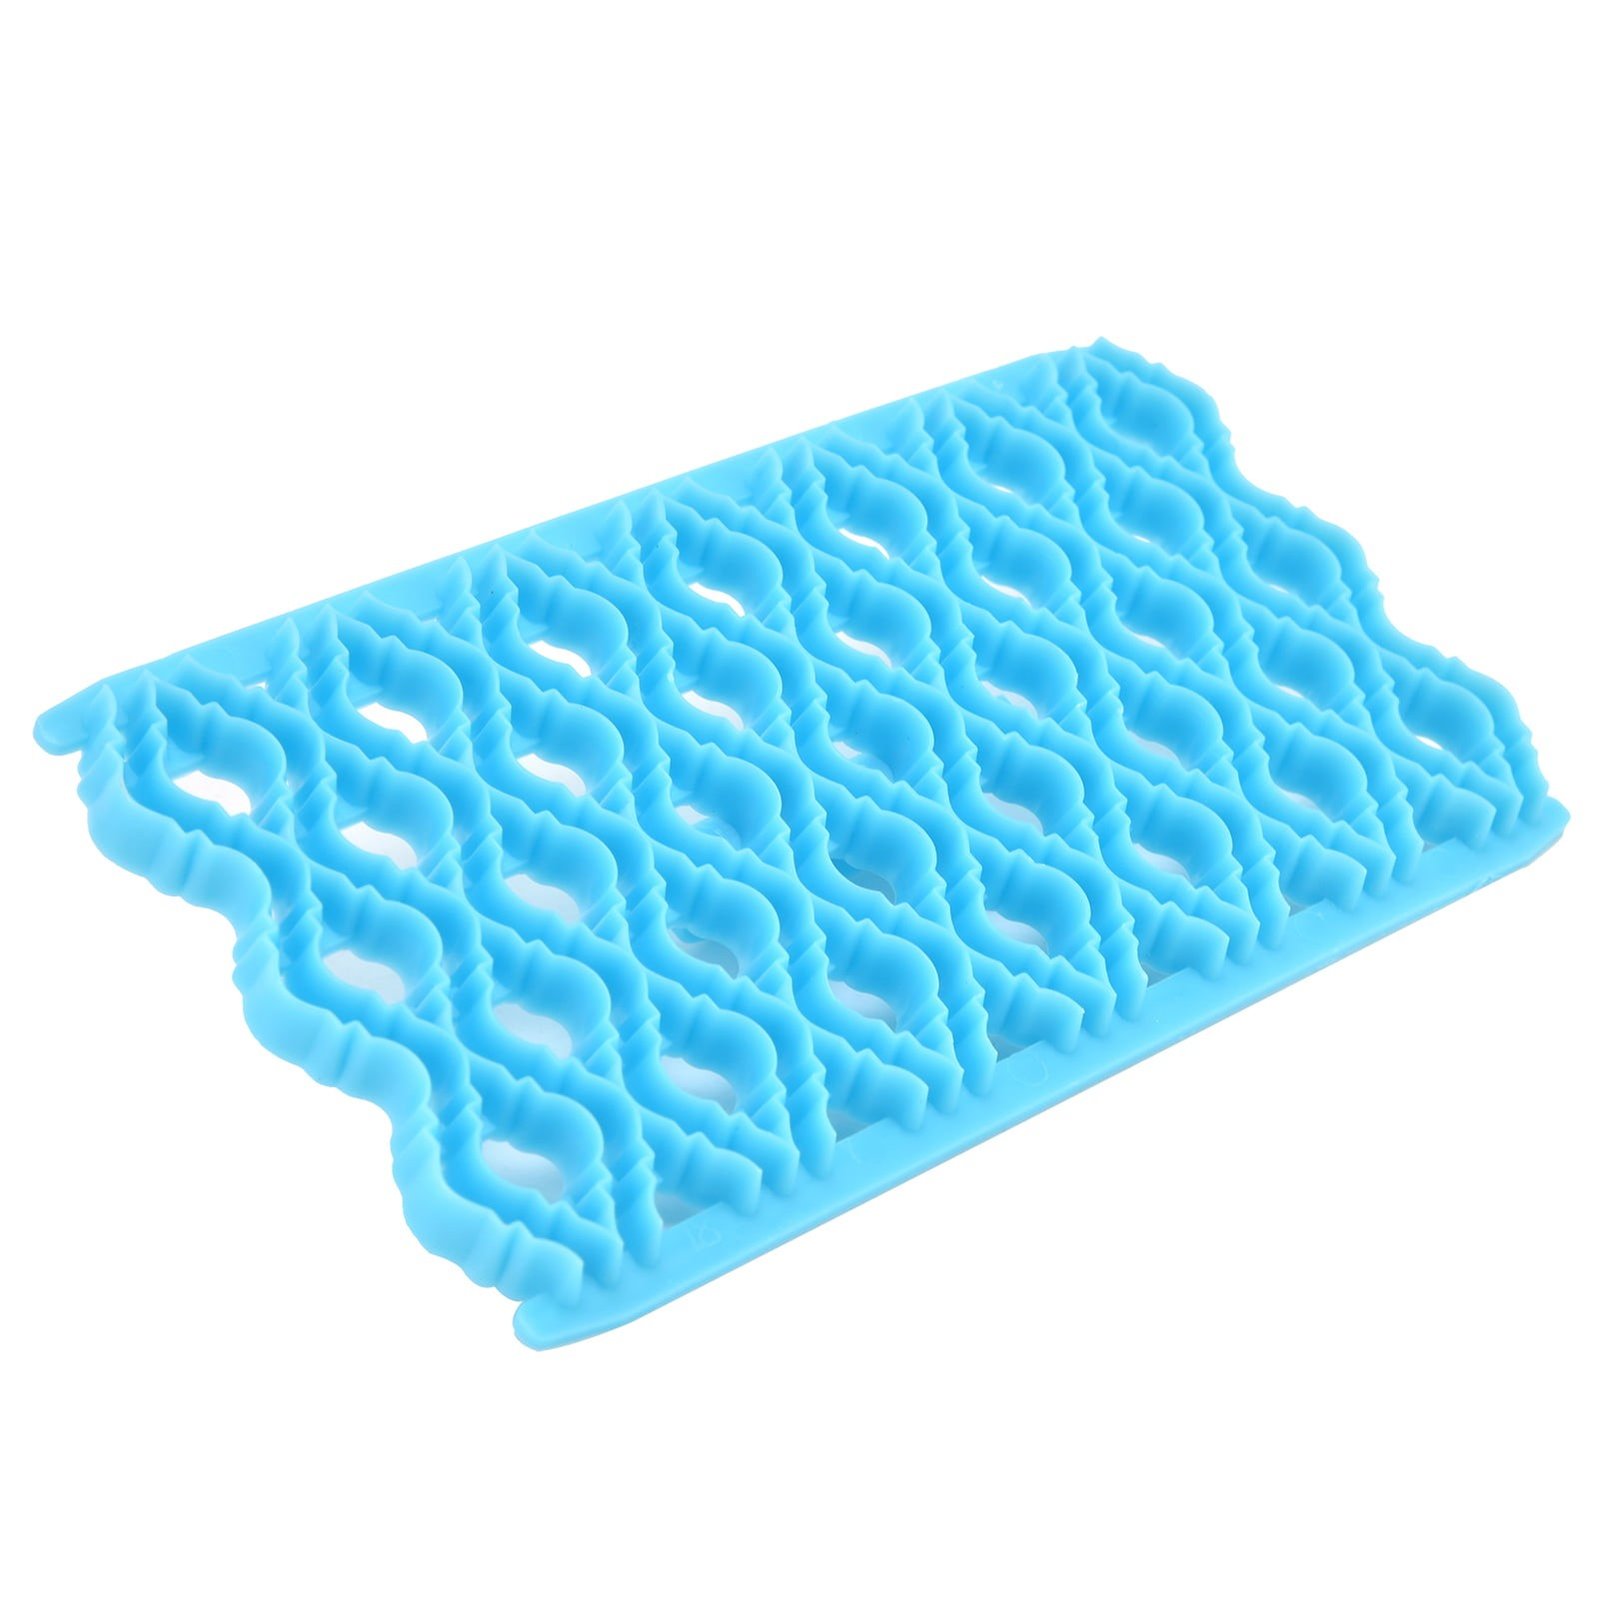 Double Grid Pattern Embosser Cutter Mould - Queenparty